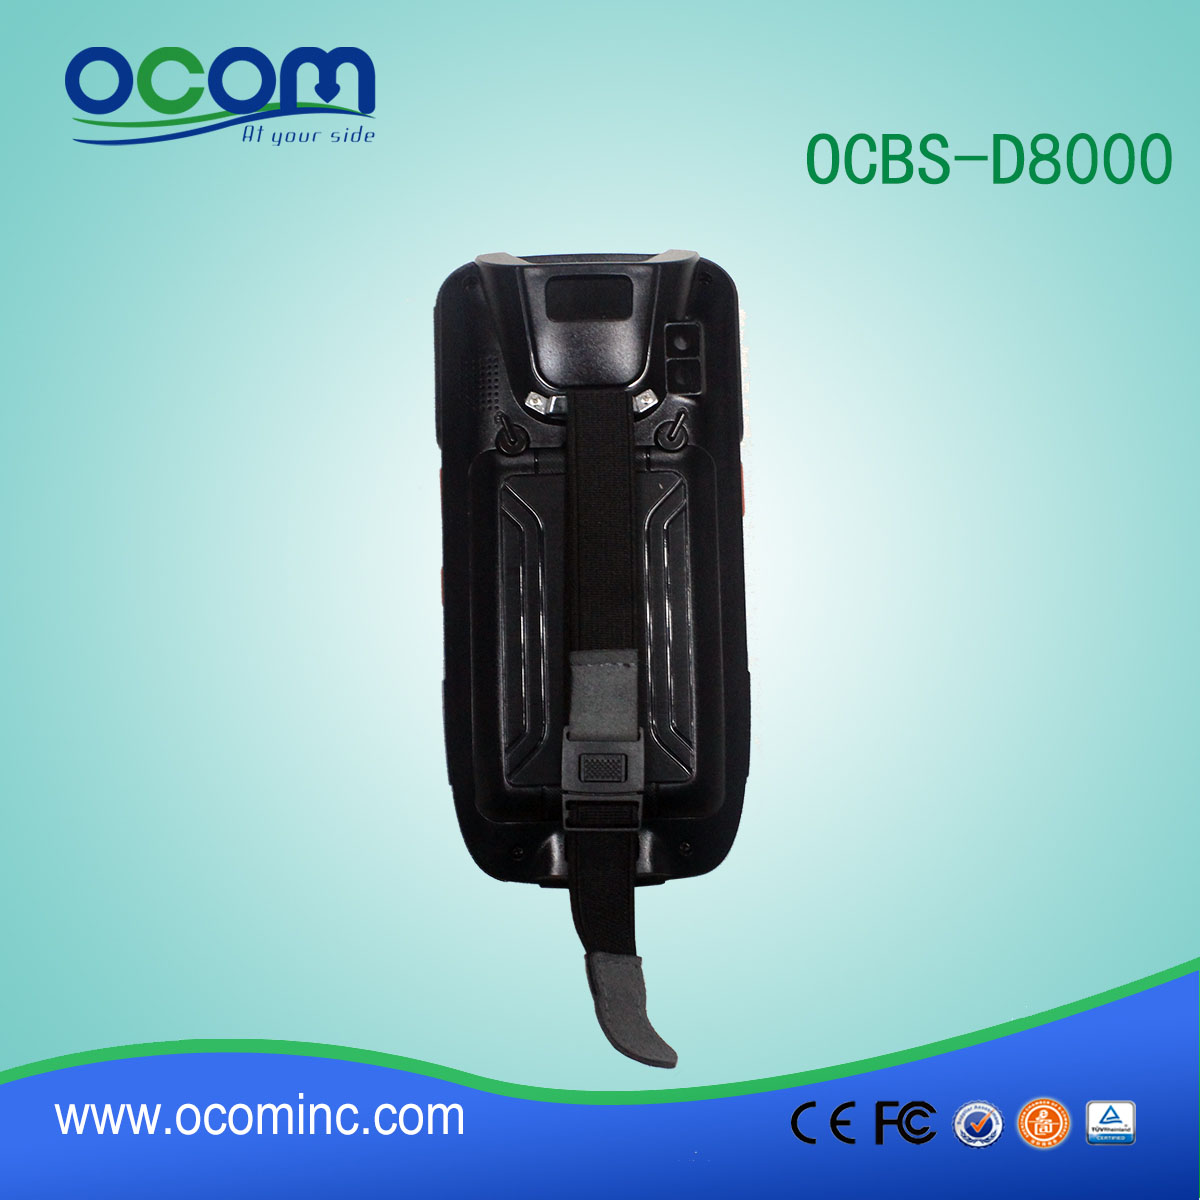 OCBS-D8000 android pda barcode laserscanner